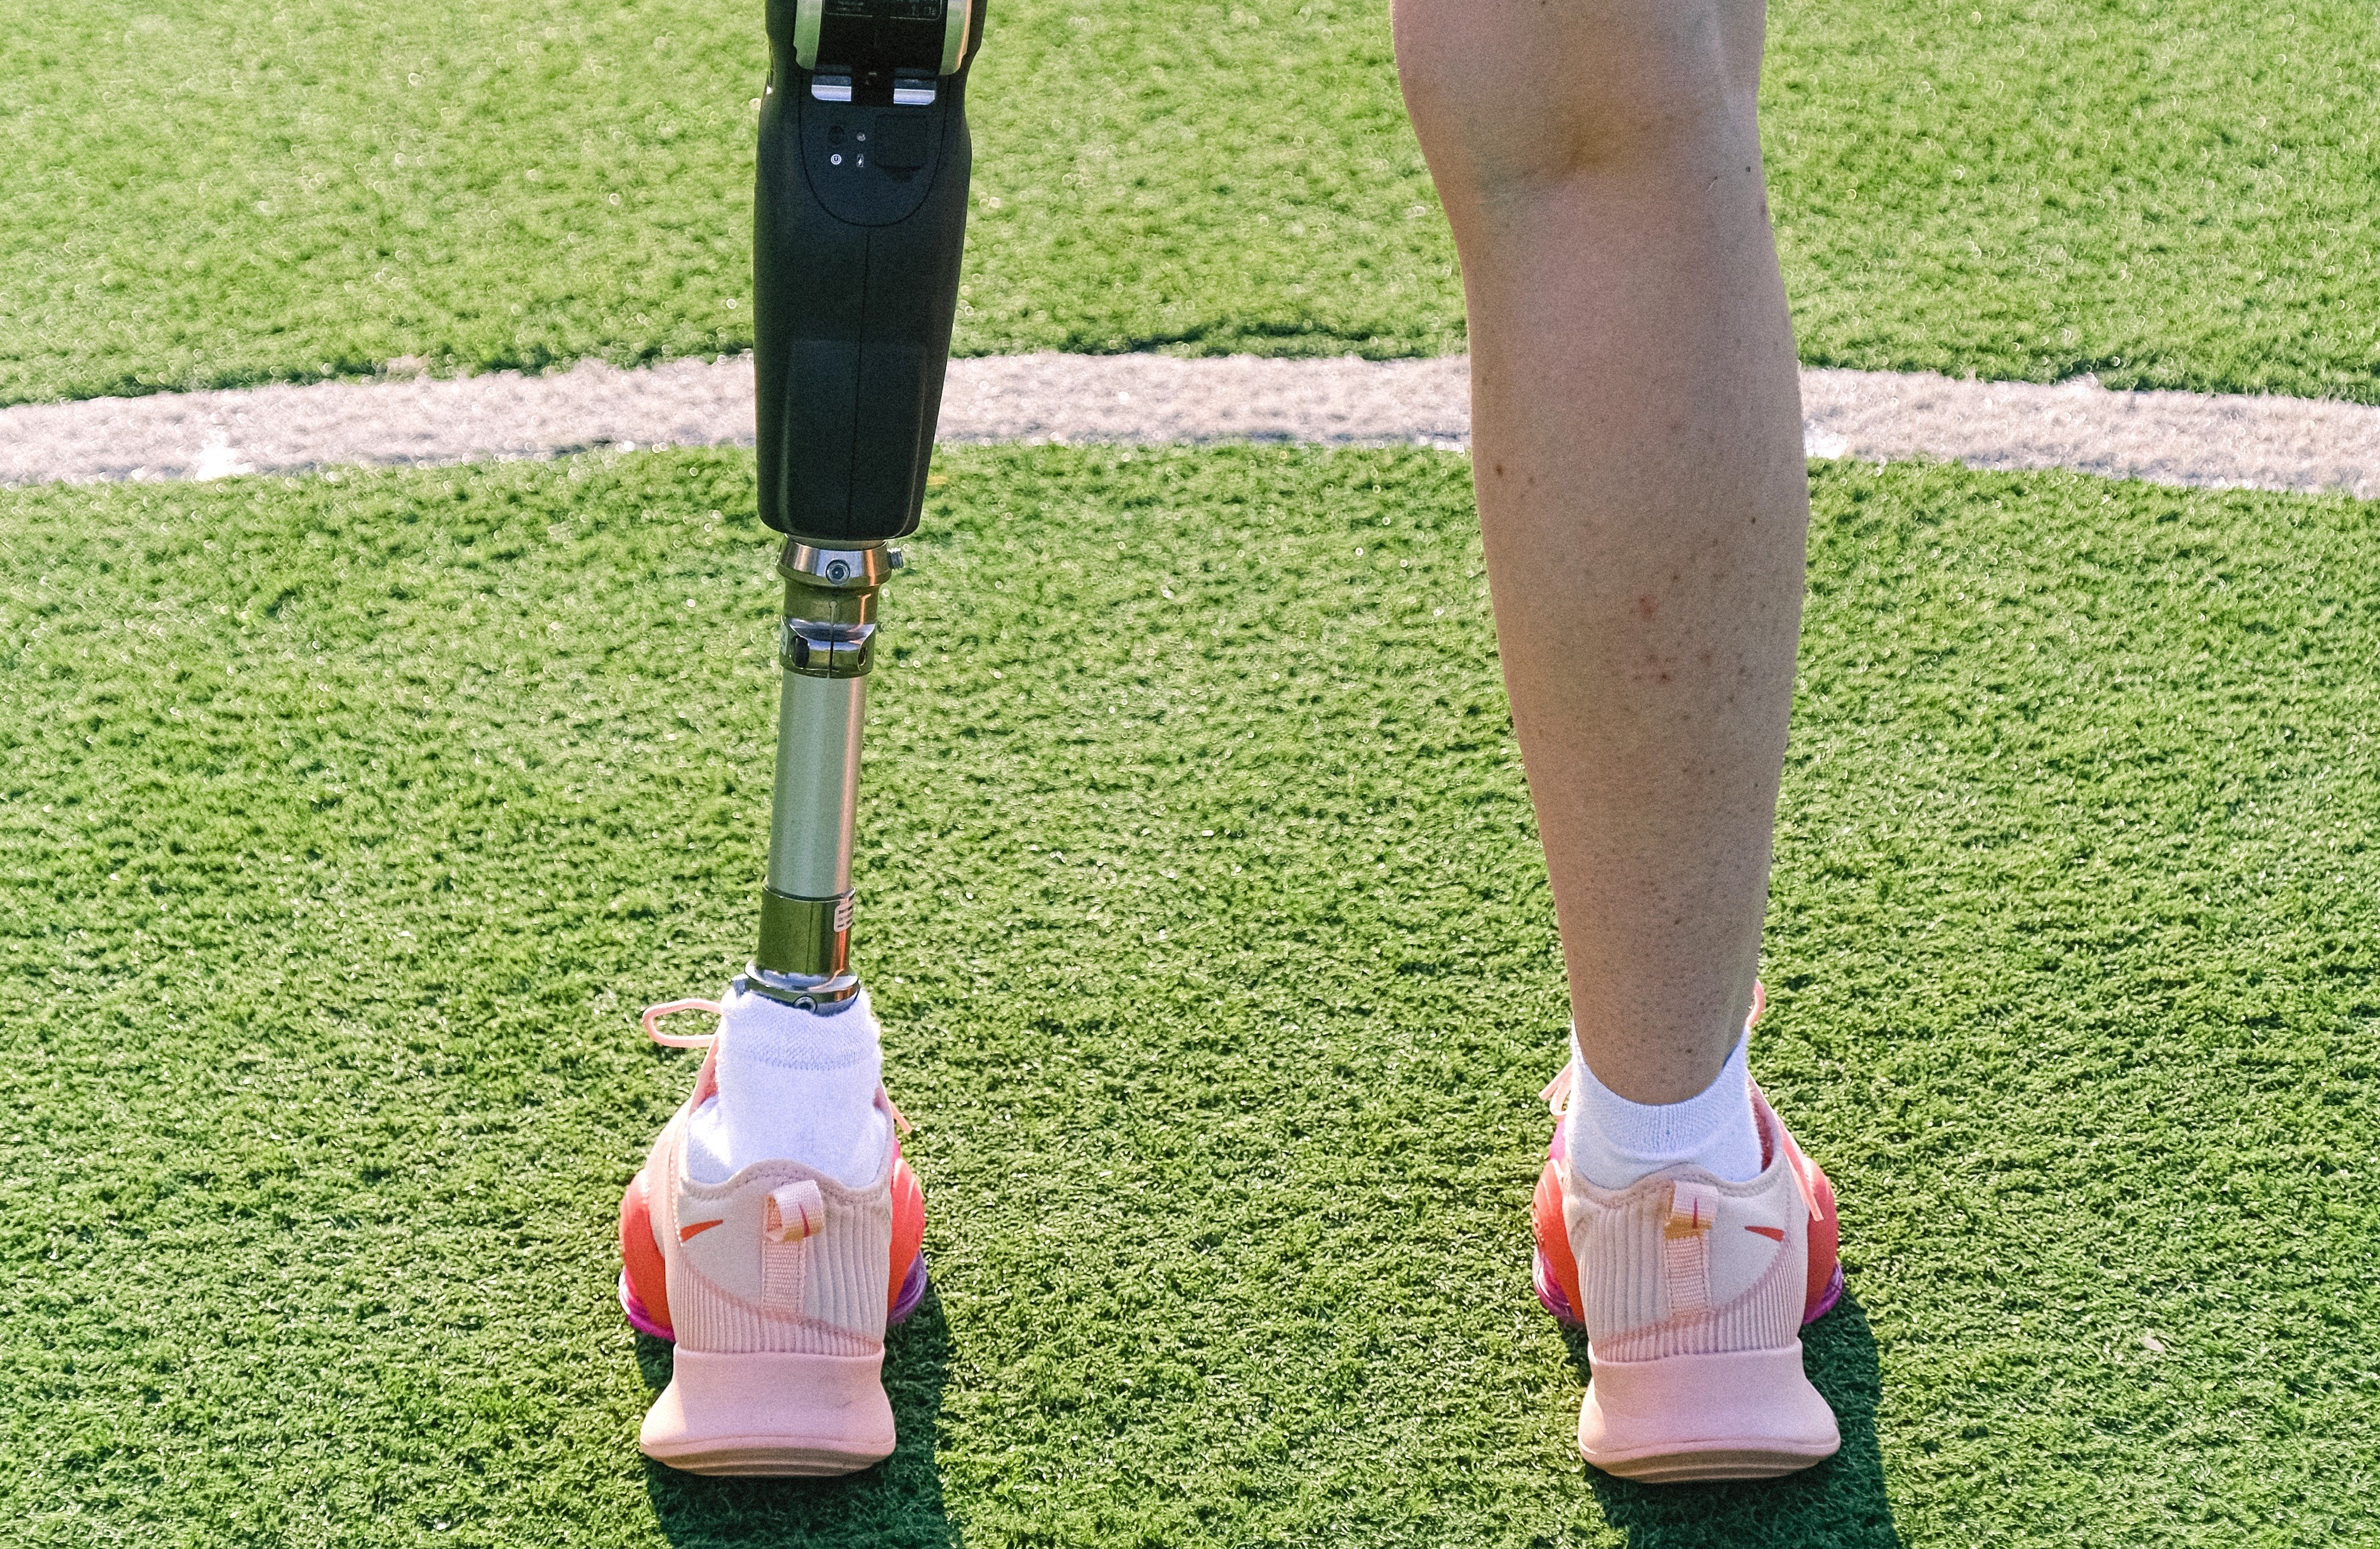 Jake & his team looked down upon Sam after seeing his prosthetic leg. | Source: Pexels